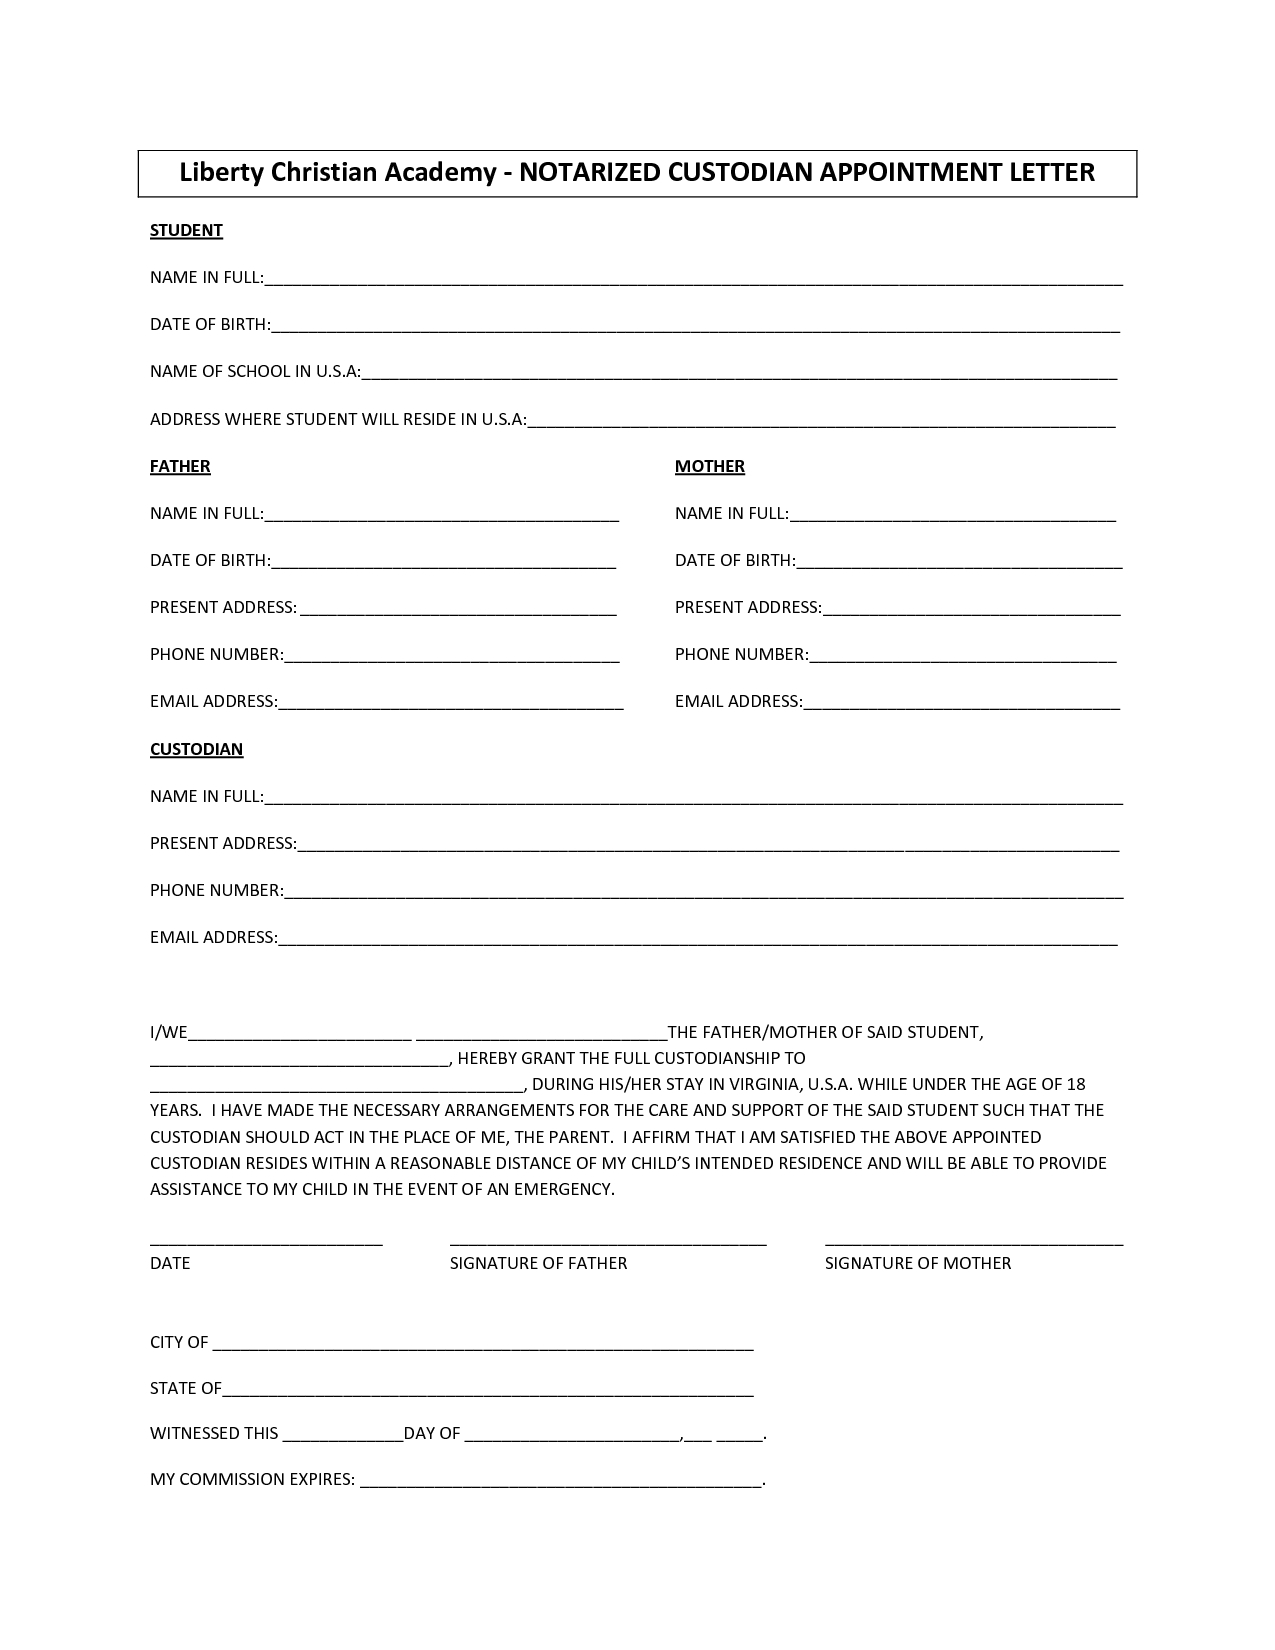 Sample Child Support Agreement Notarized Letter For Child Support Monzaberglauf Verband